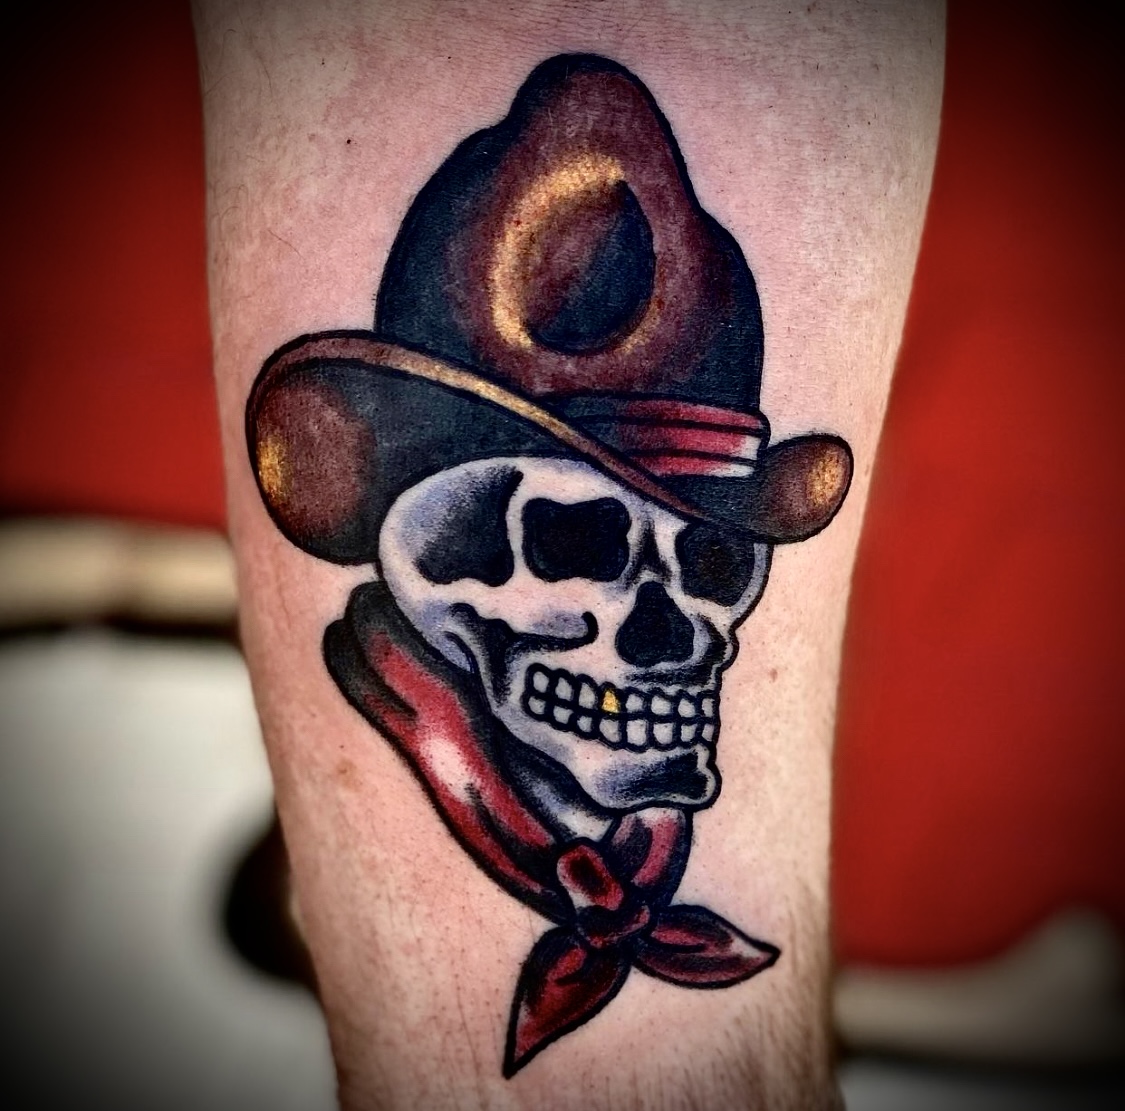 Tattoo of a skull in a cowboy hat